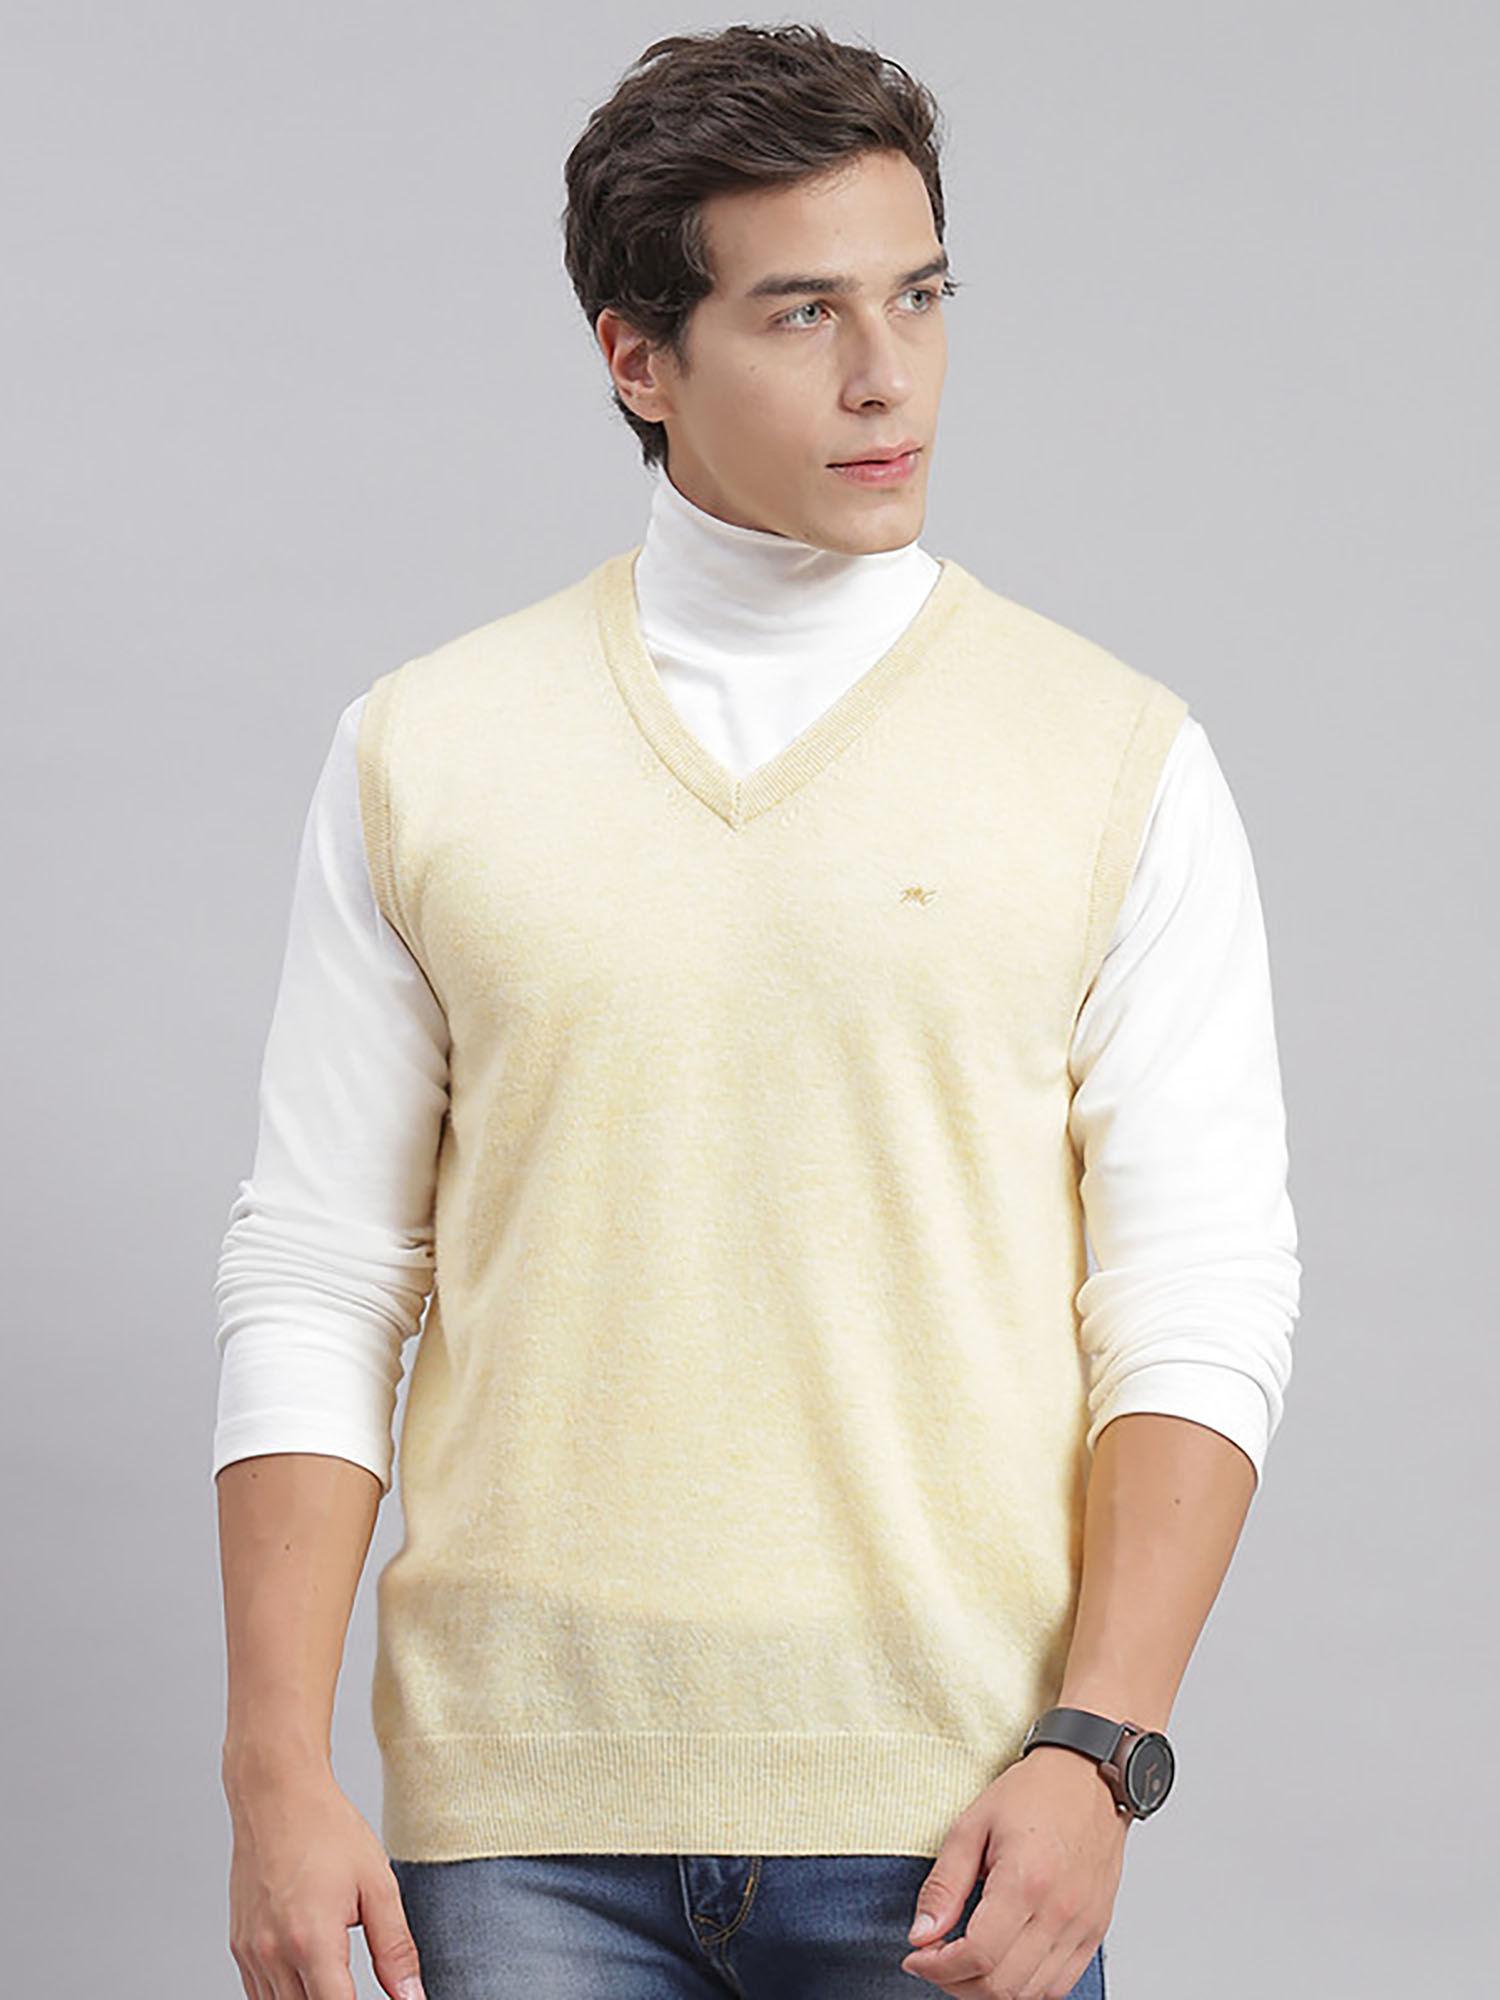 lt-yellow-mix-solid-v-neck-sweater